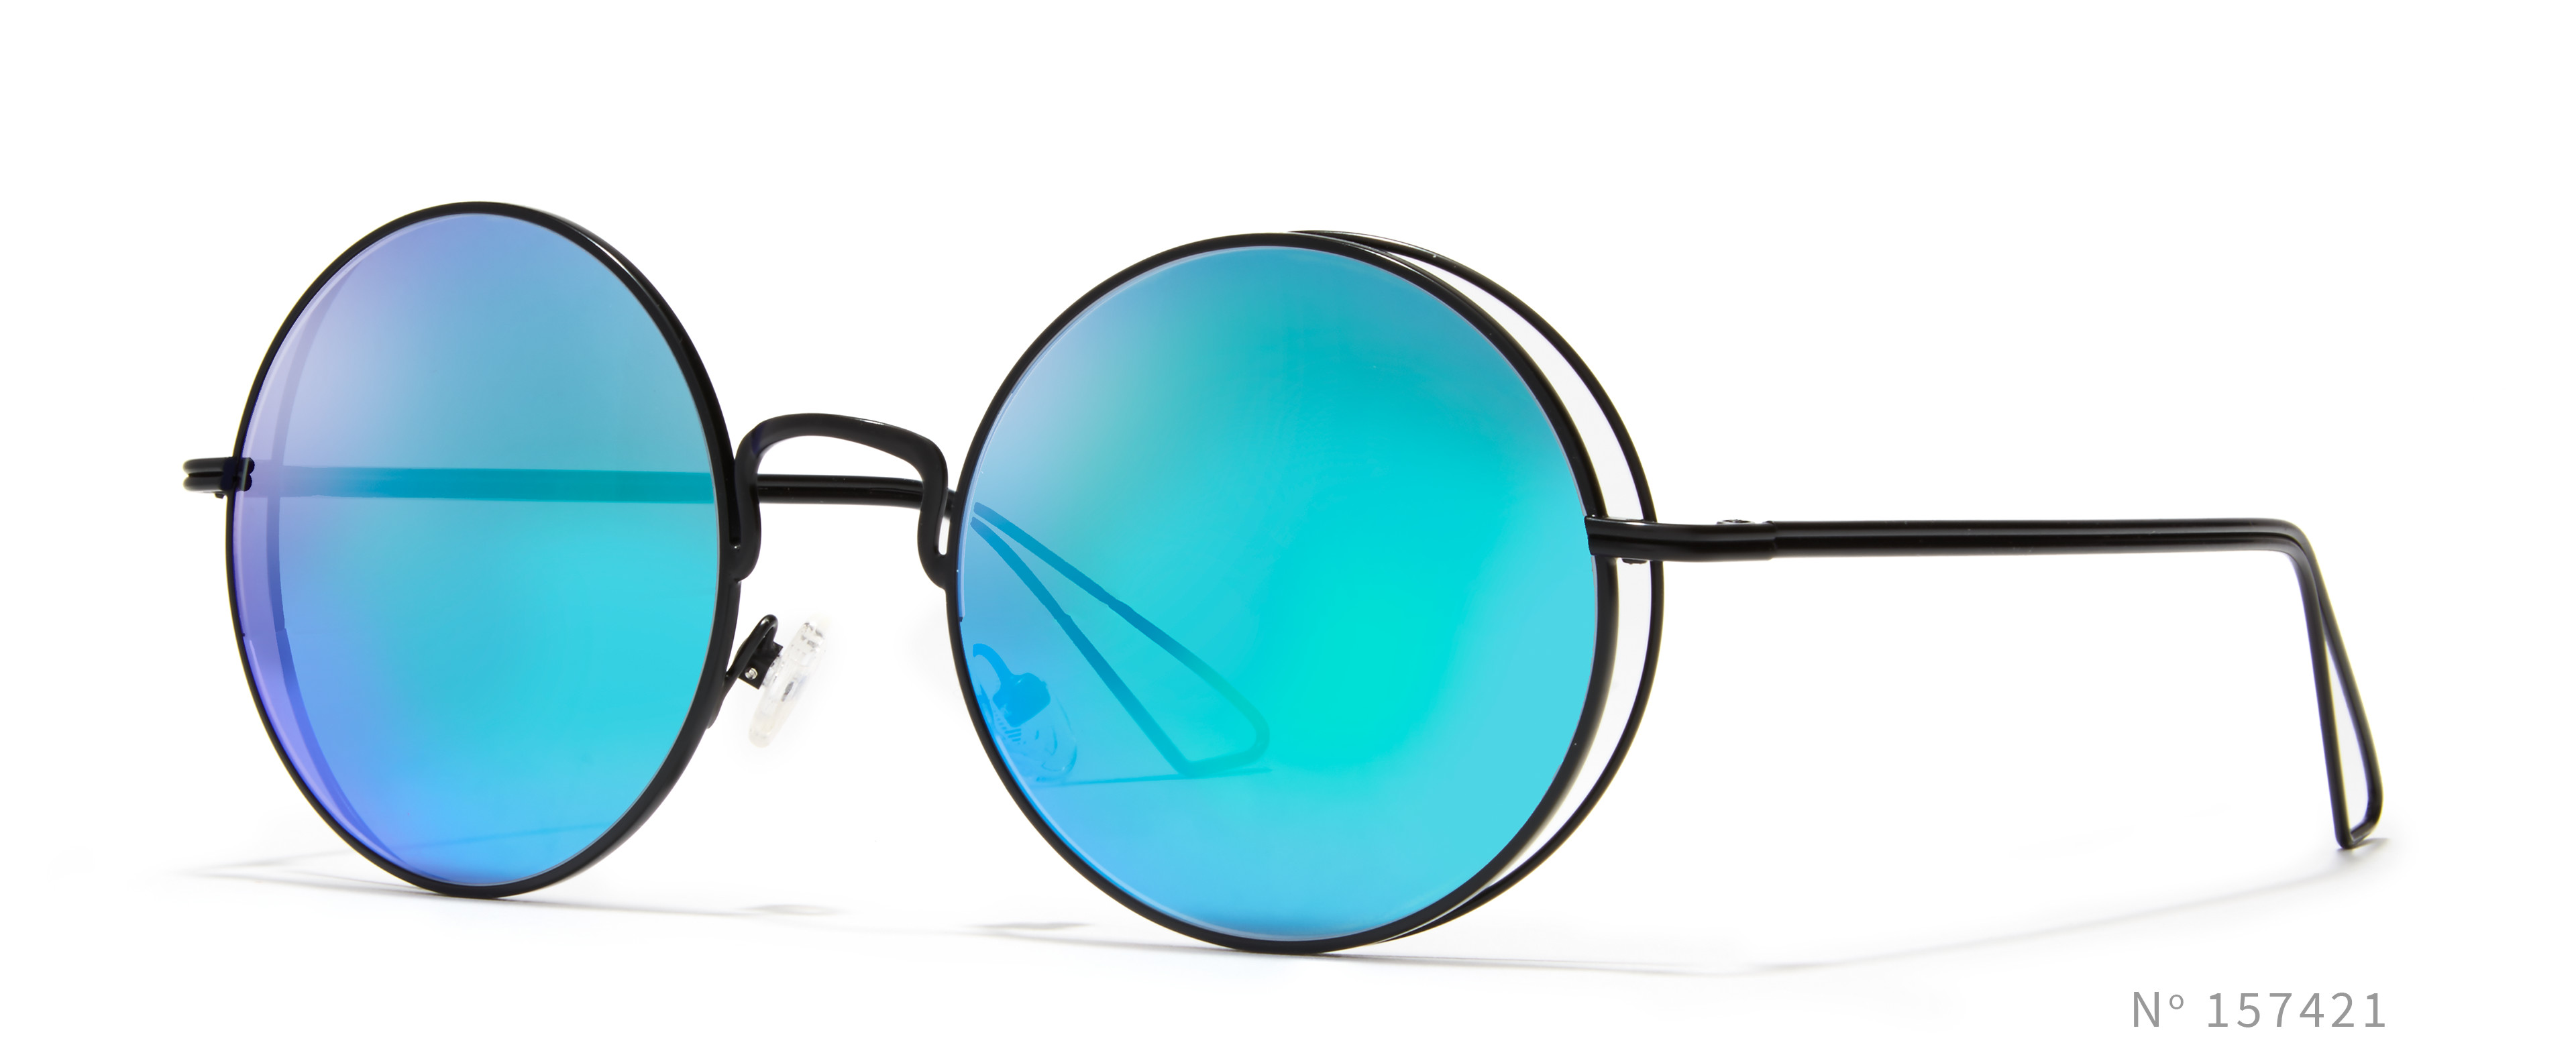 Round Wireframe Colored Sunglasses